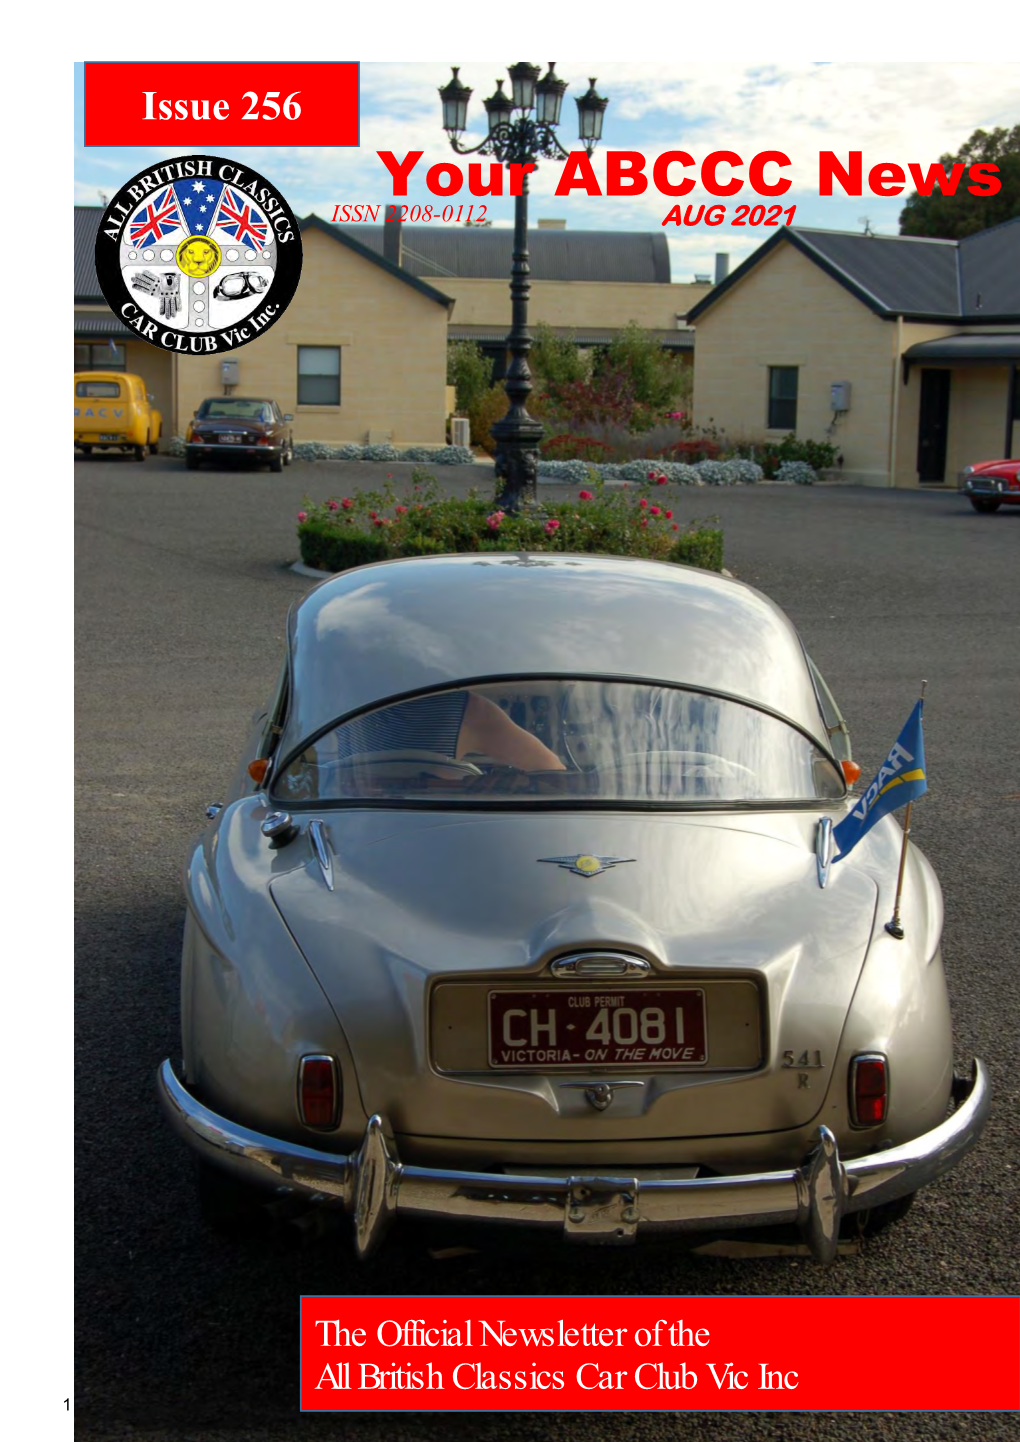 The Official Newsletter of the All British Classics Car Club (VIC) Inc